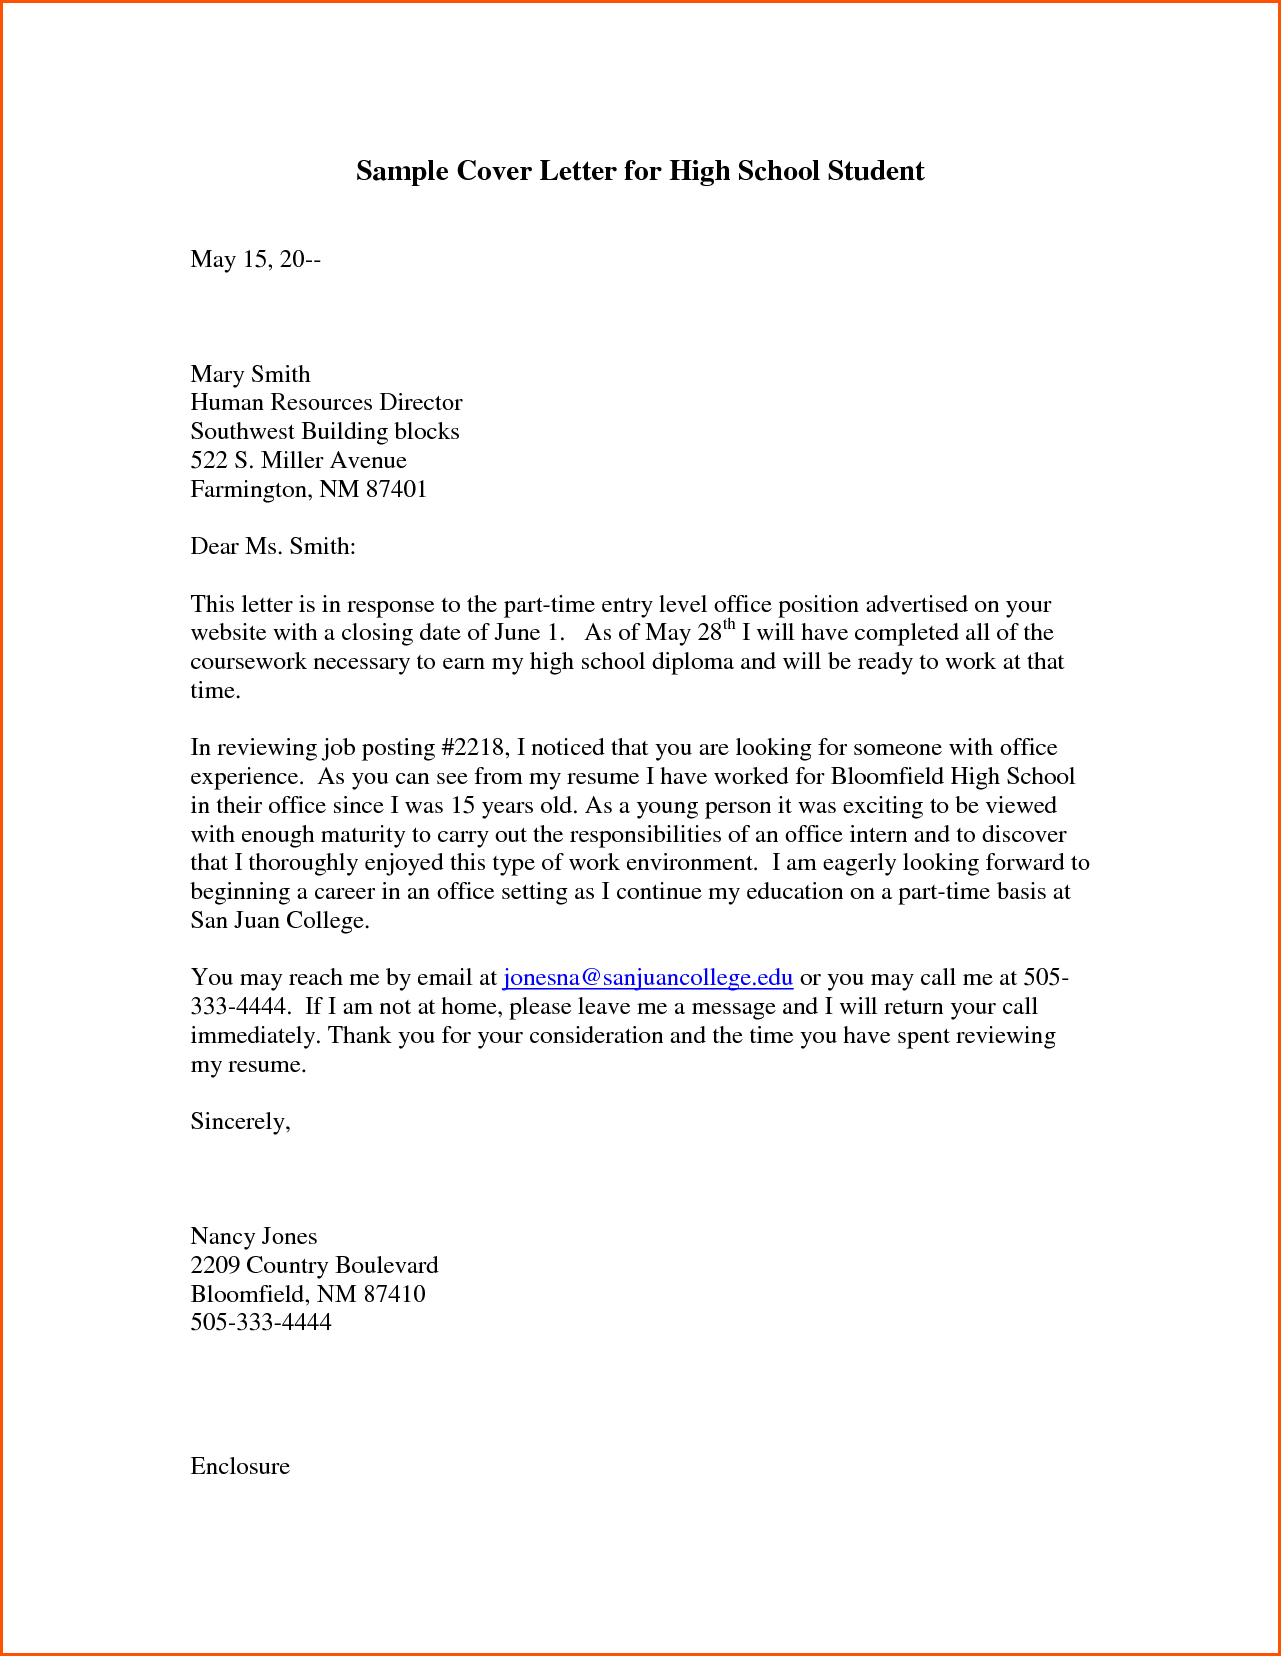 cover letter for high school student denial sample college application